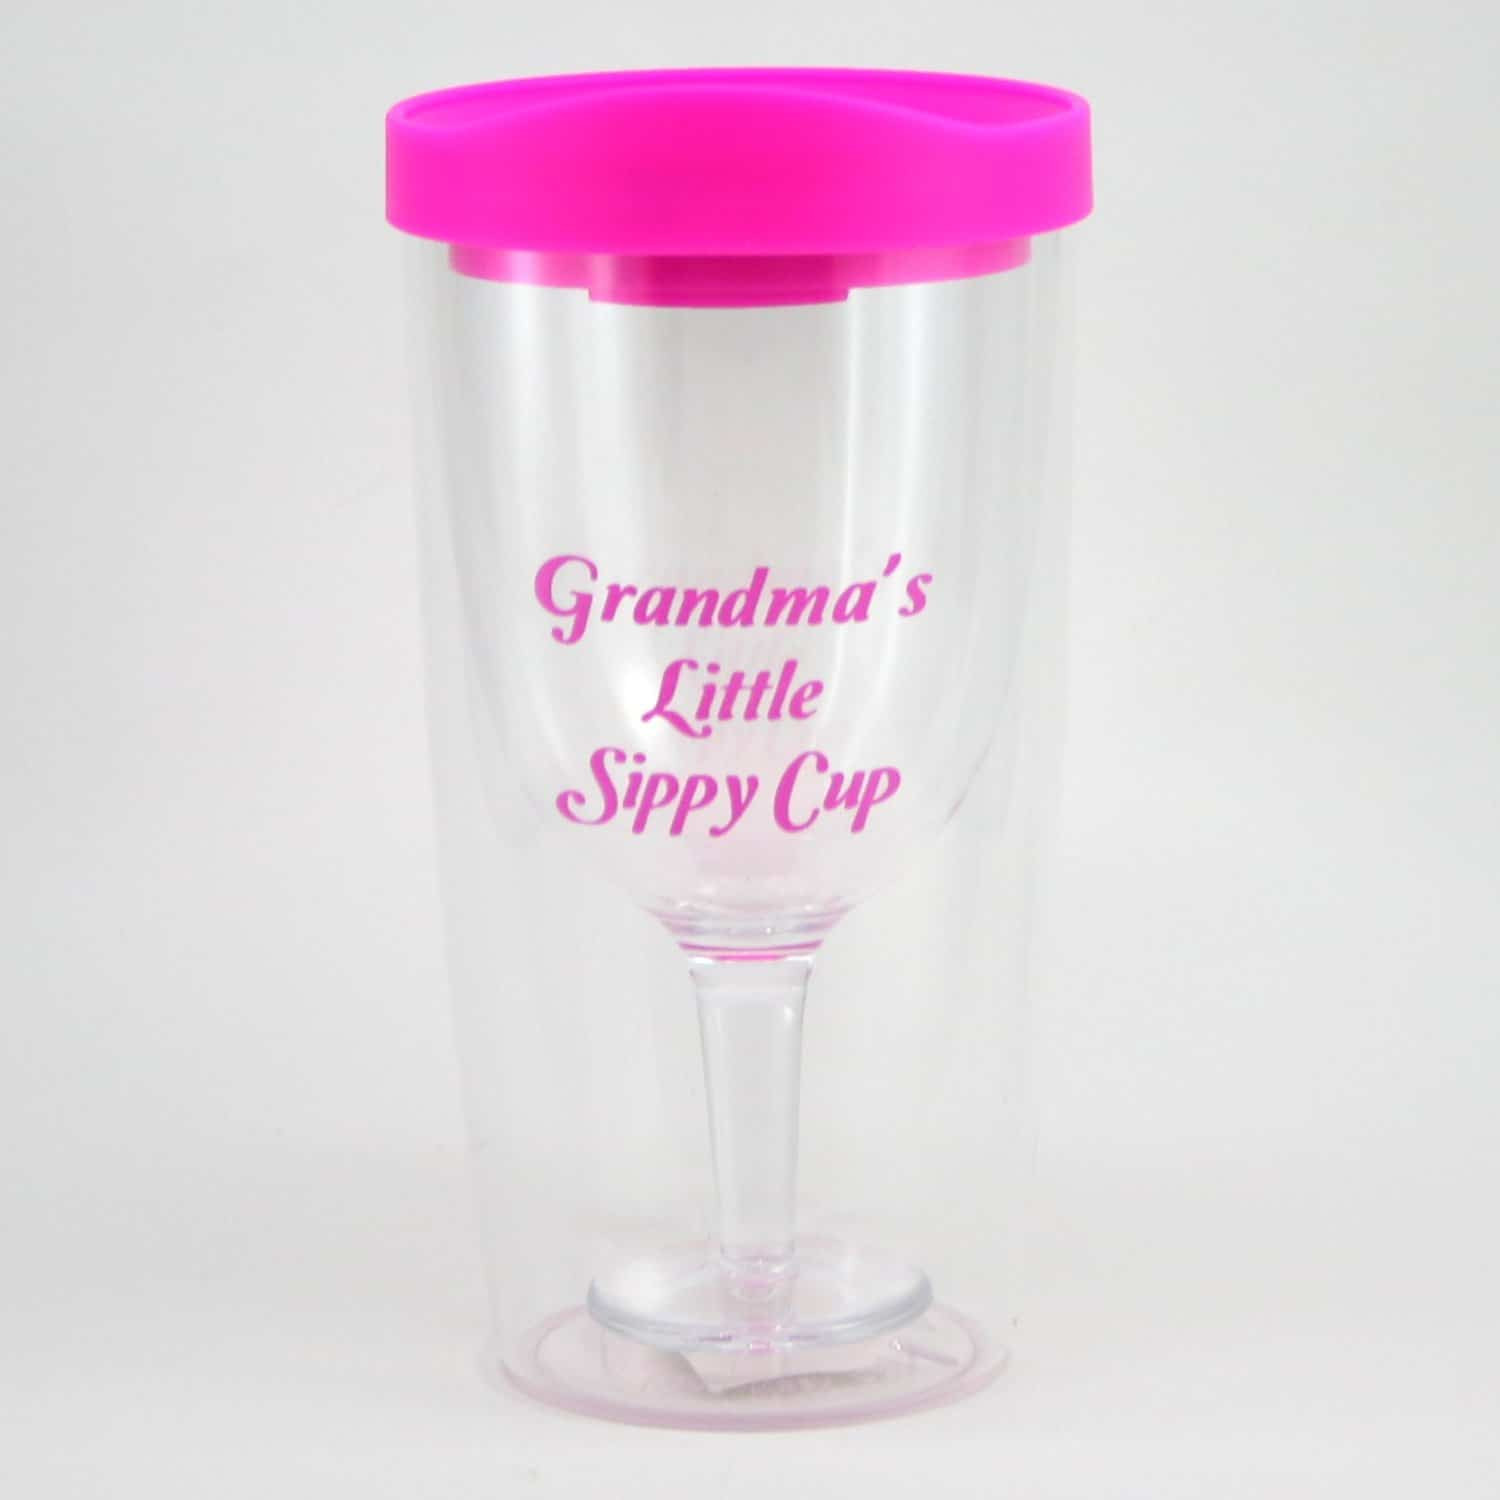 New Grandmother Gift Ideas
 First Time Grandma Gifts 25 Great 1st Grandma Gift Ideas